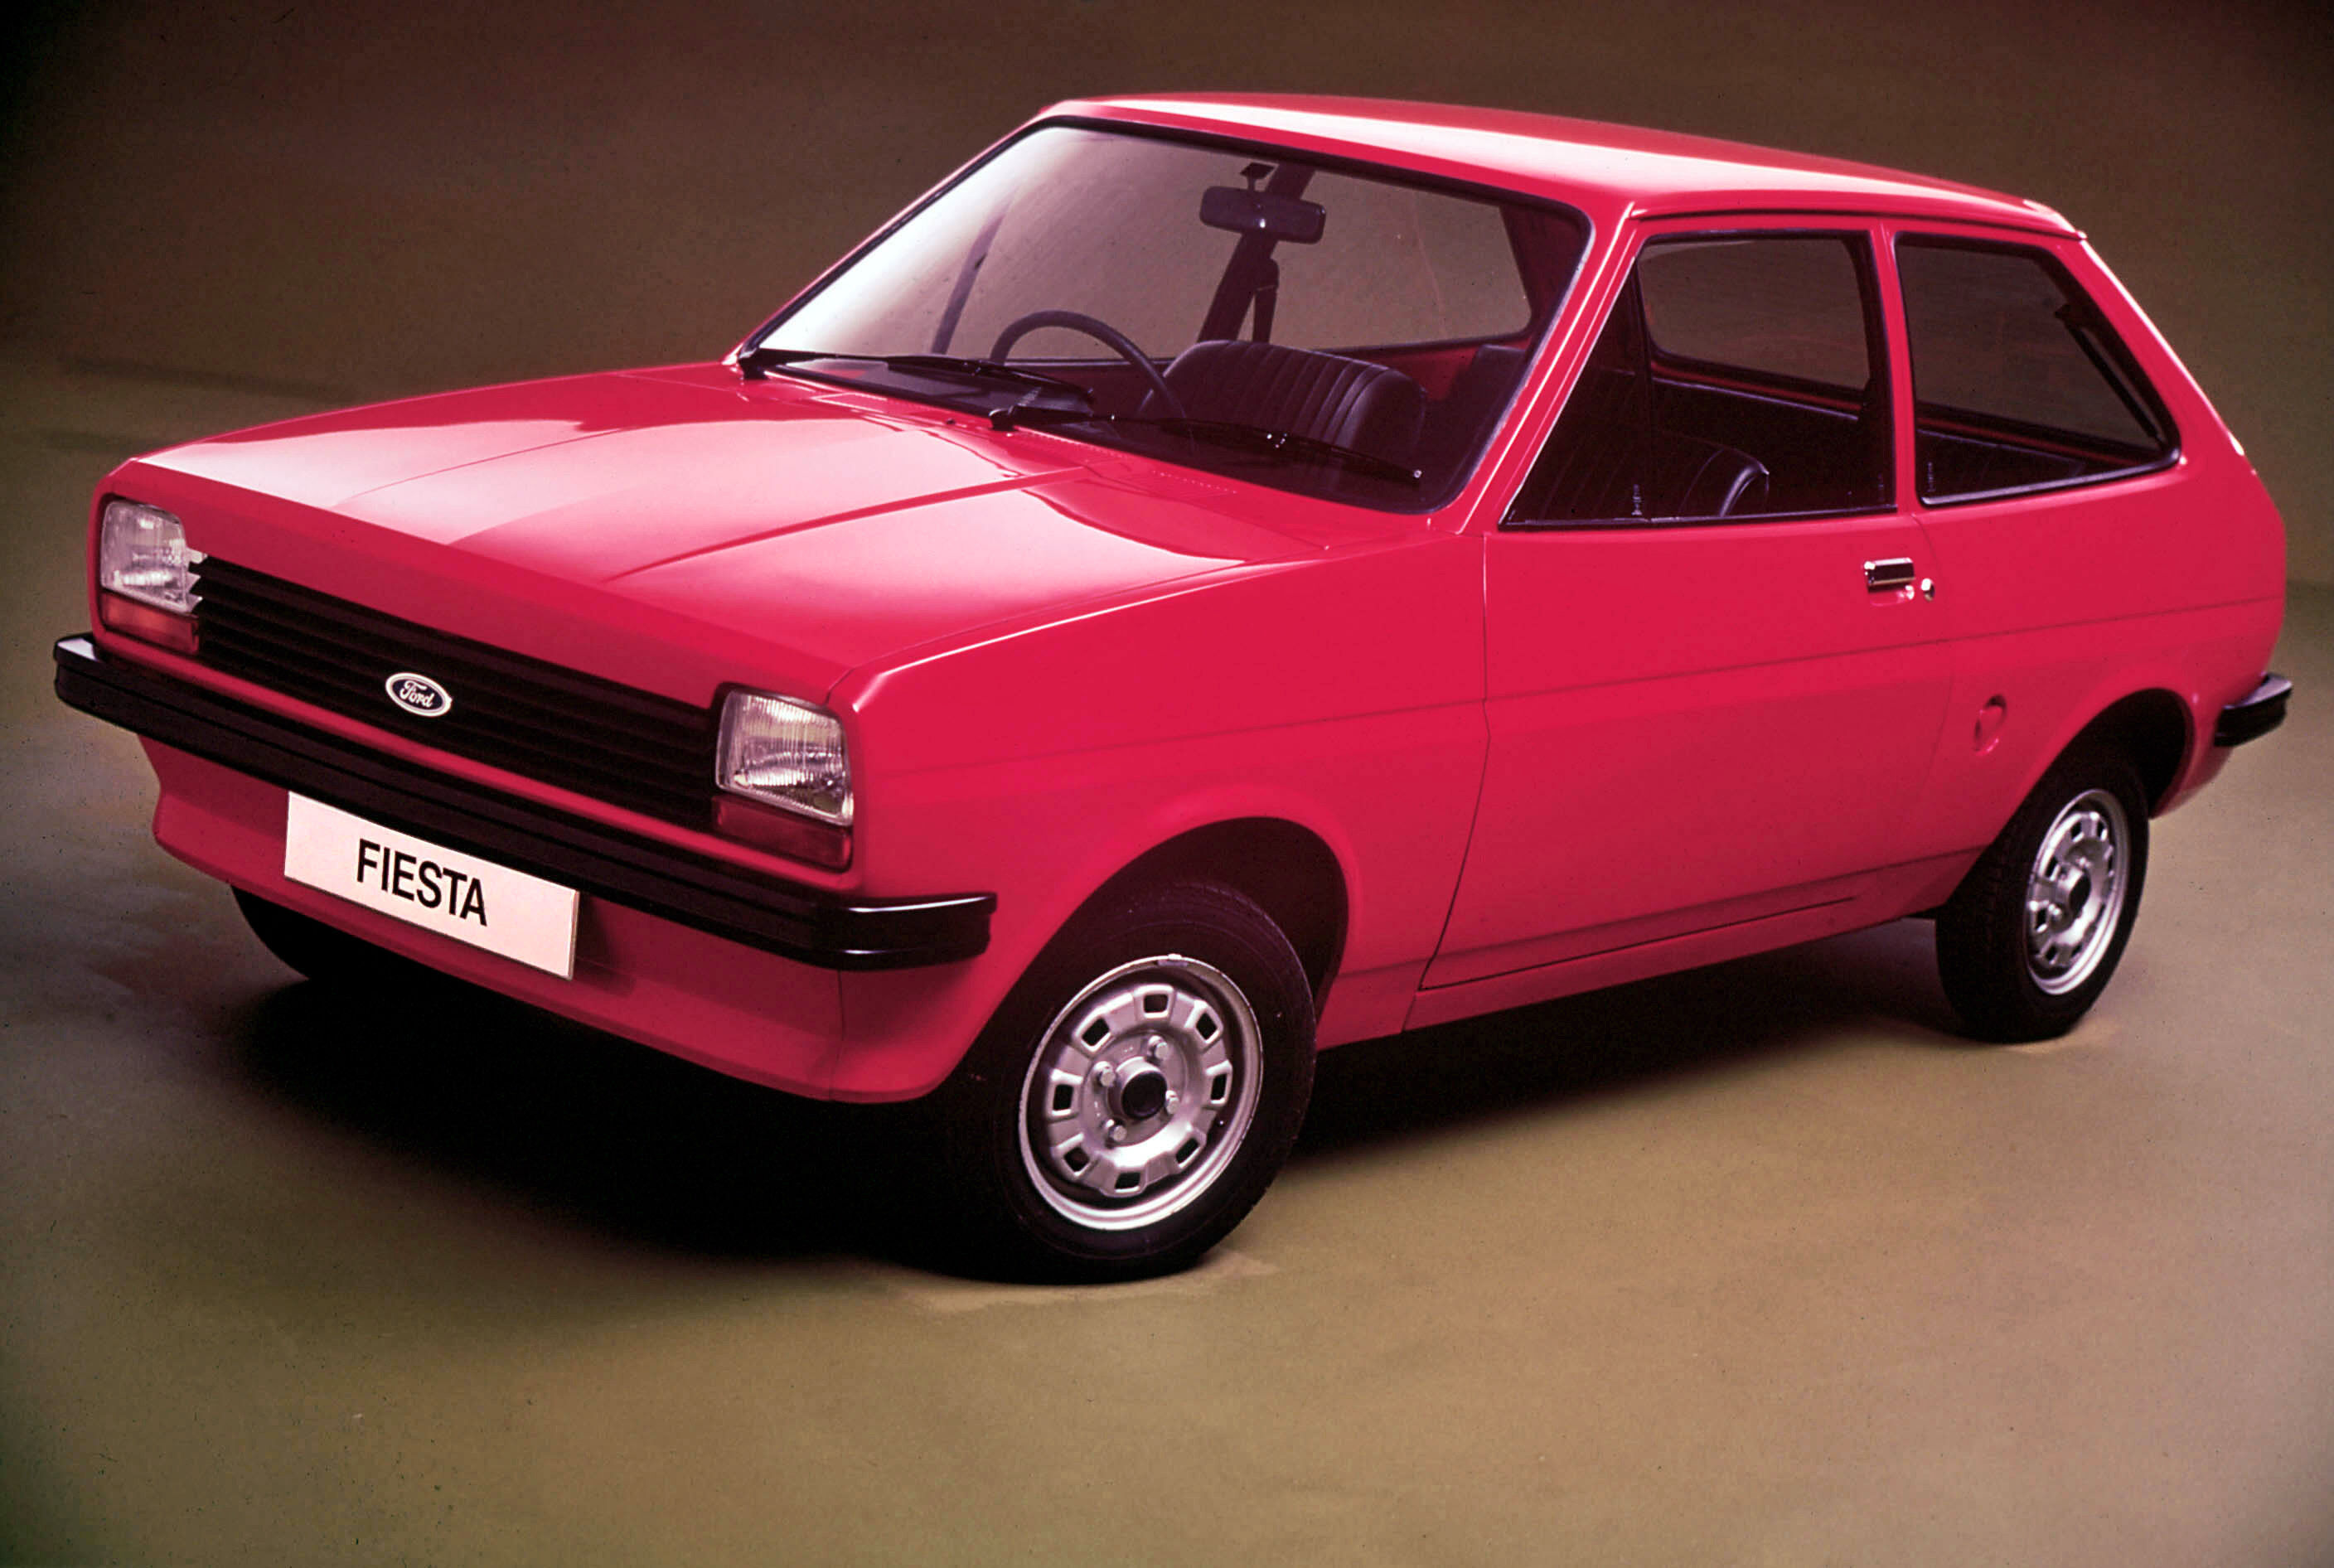 The 1976 'Basic' Ford Fiesta